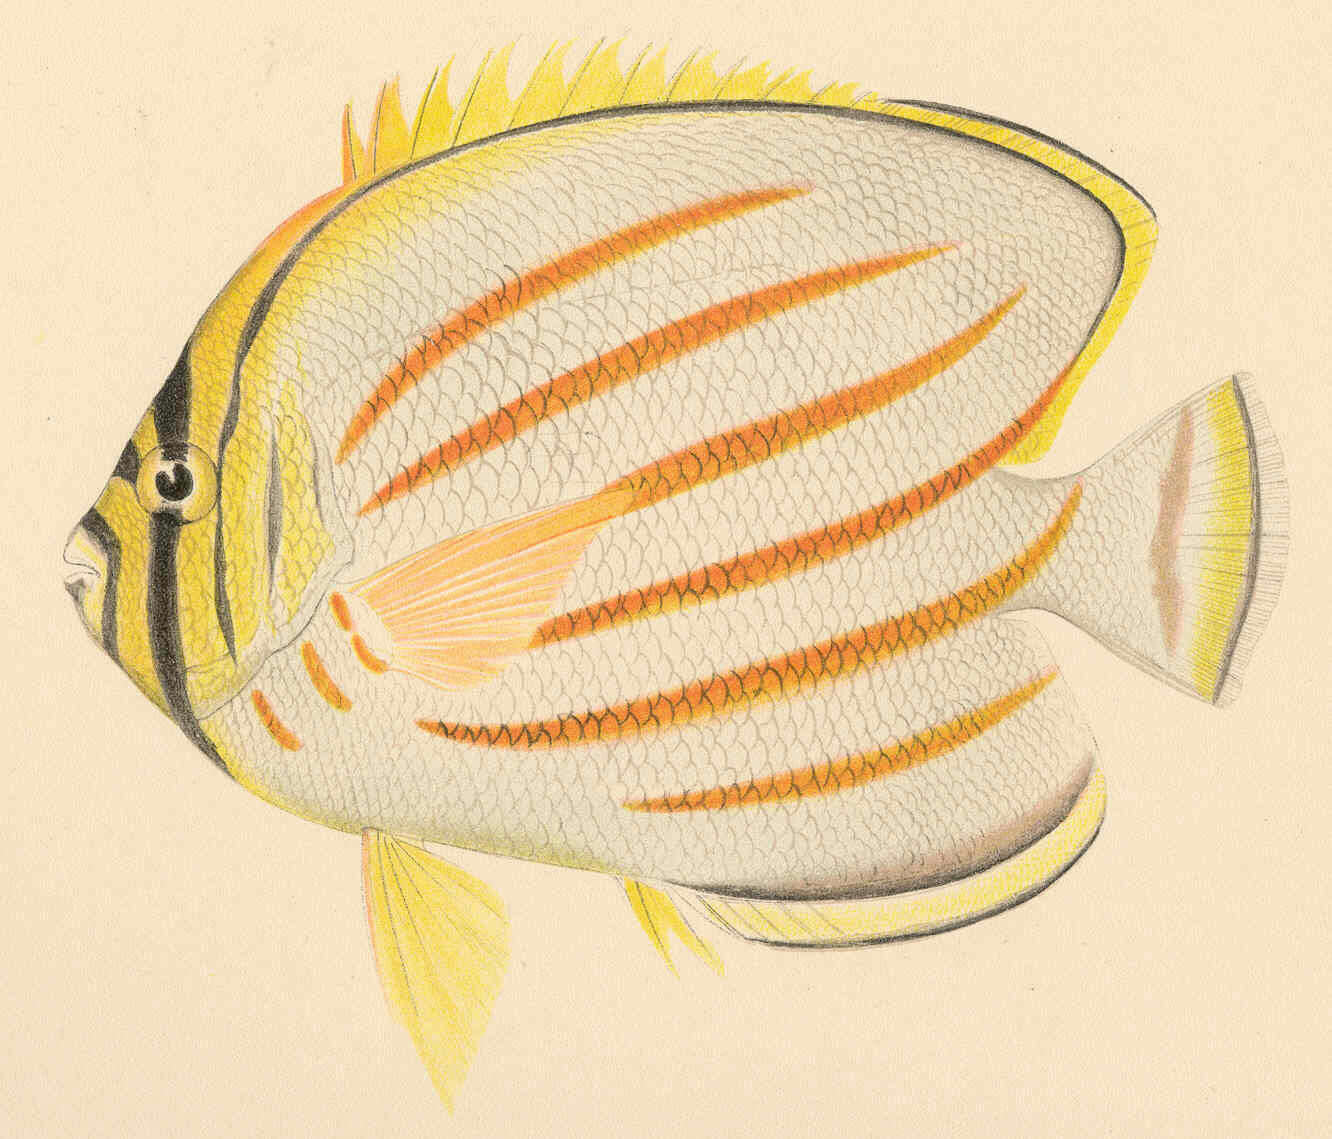 Image of Clown Butterflyfish